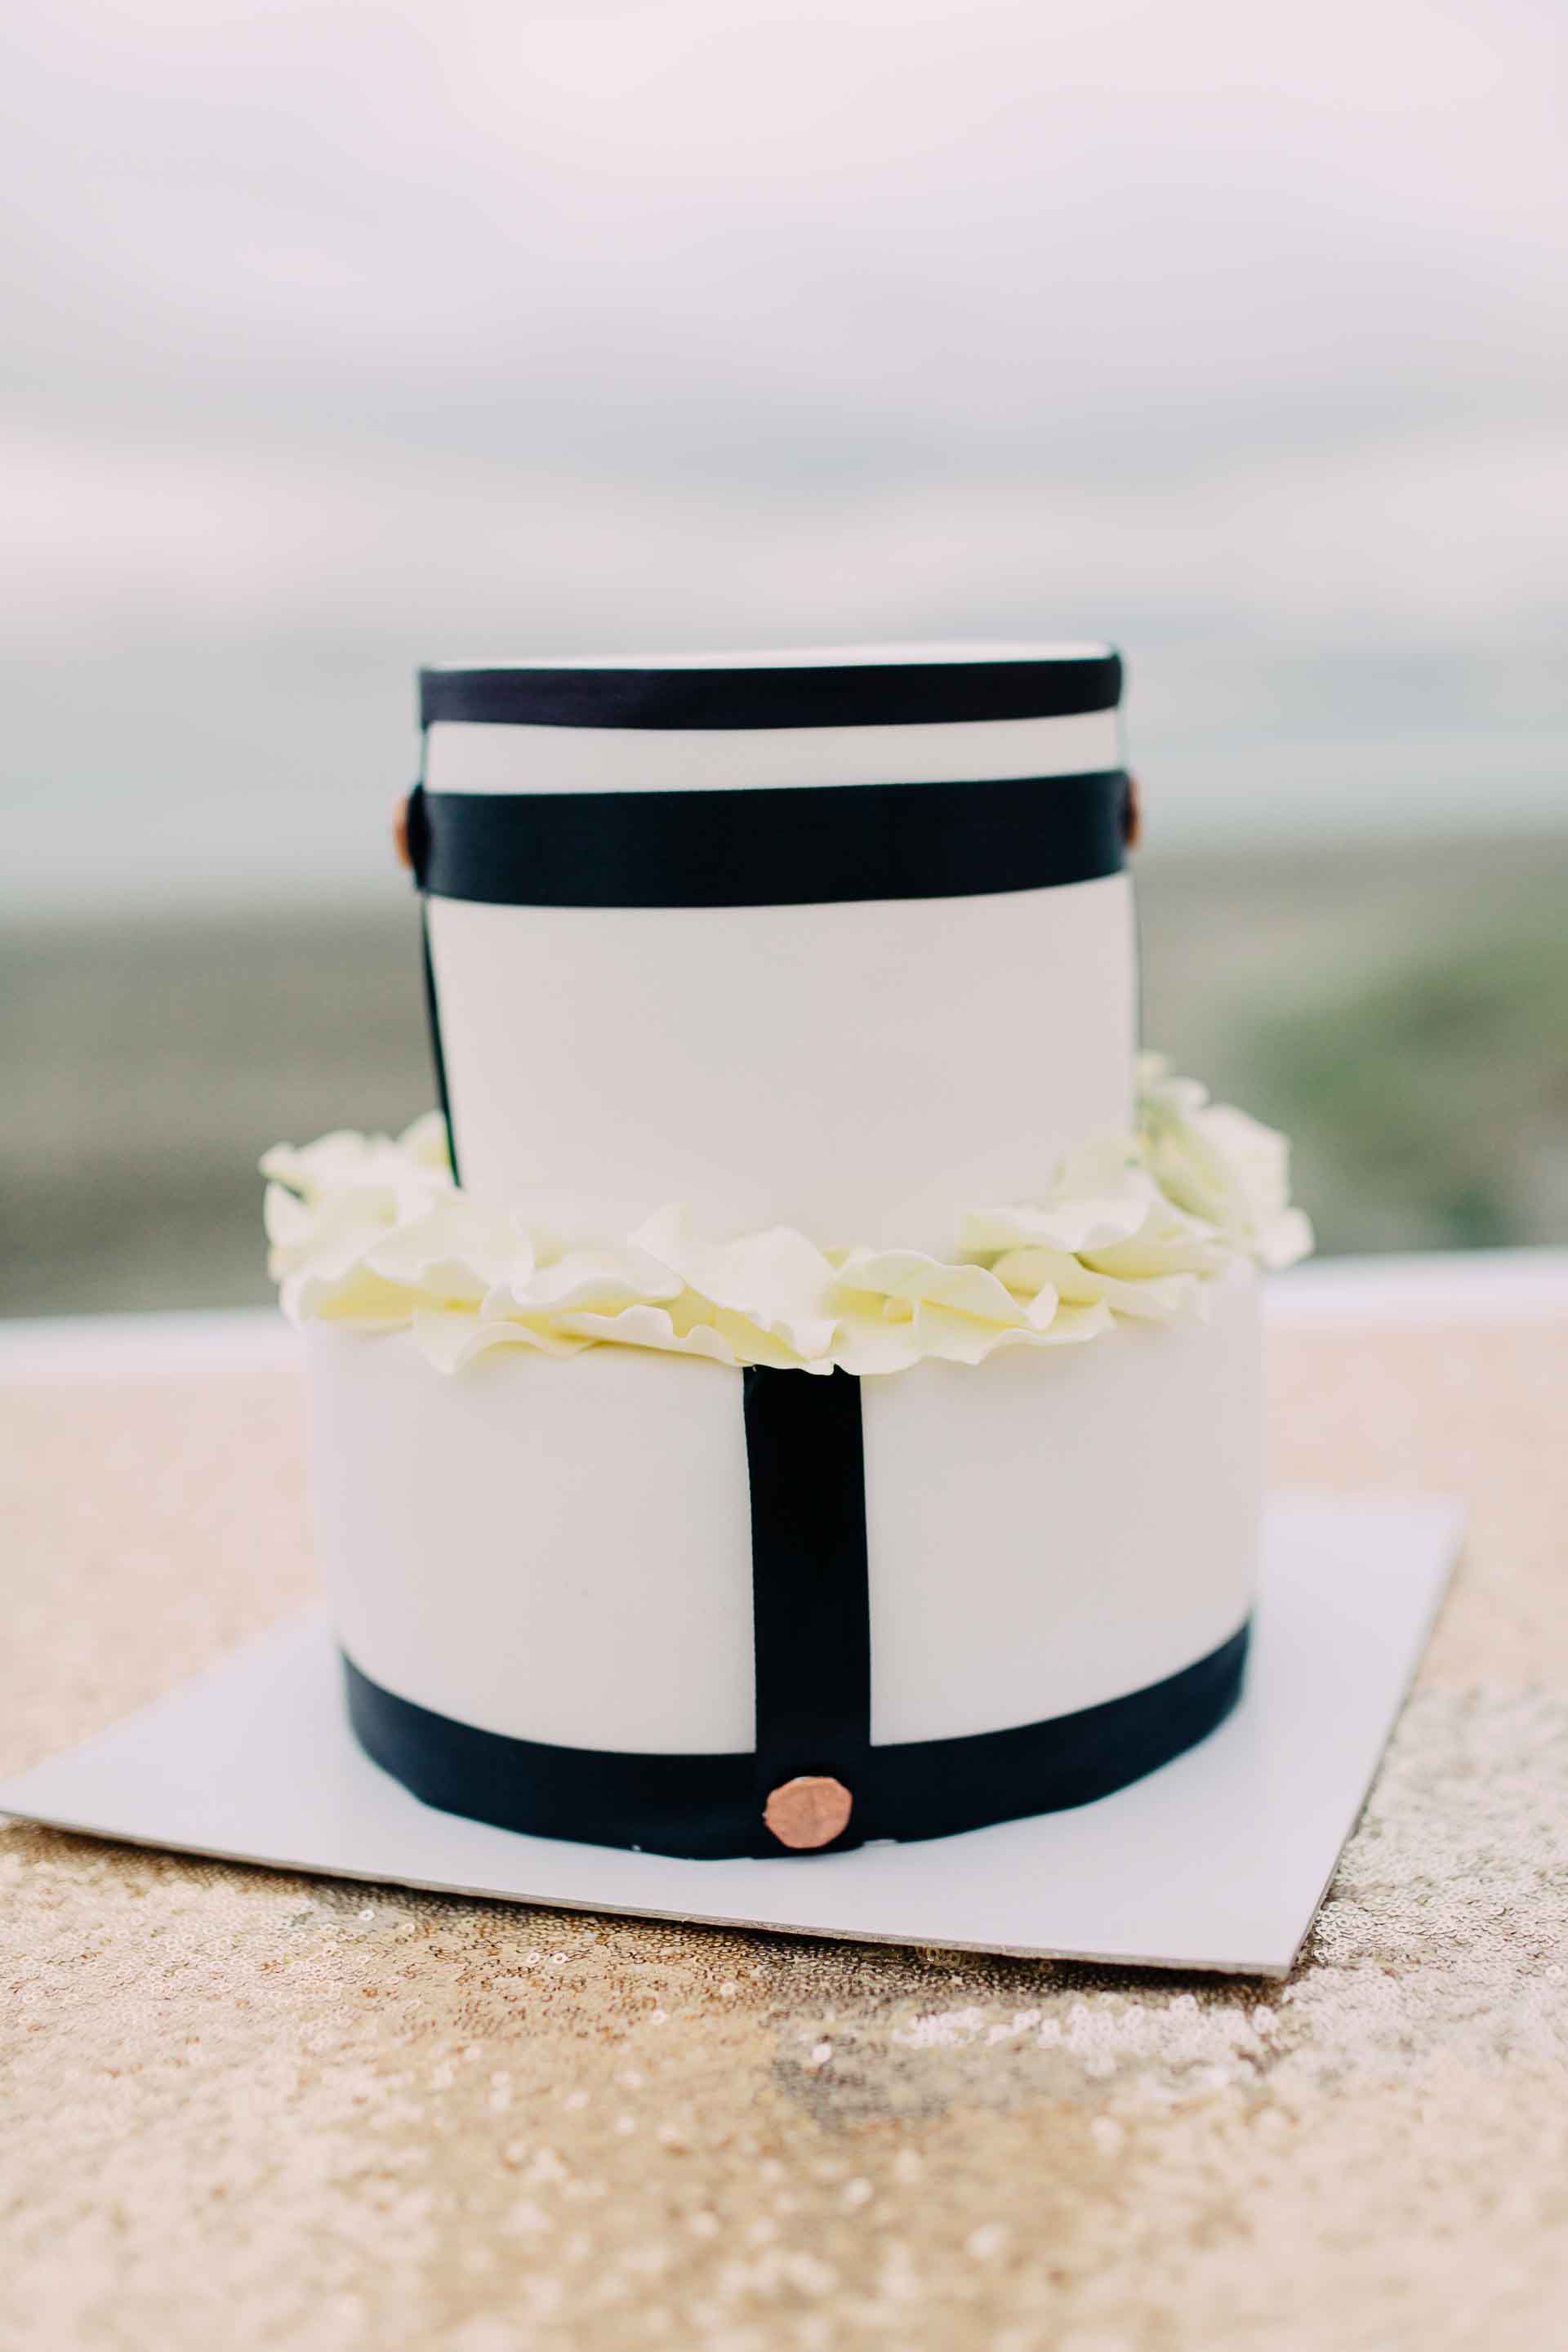 Classic and timeless black and white wedding cake for this Fiji wedding.